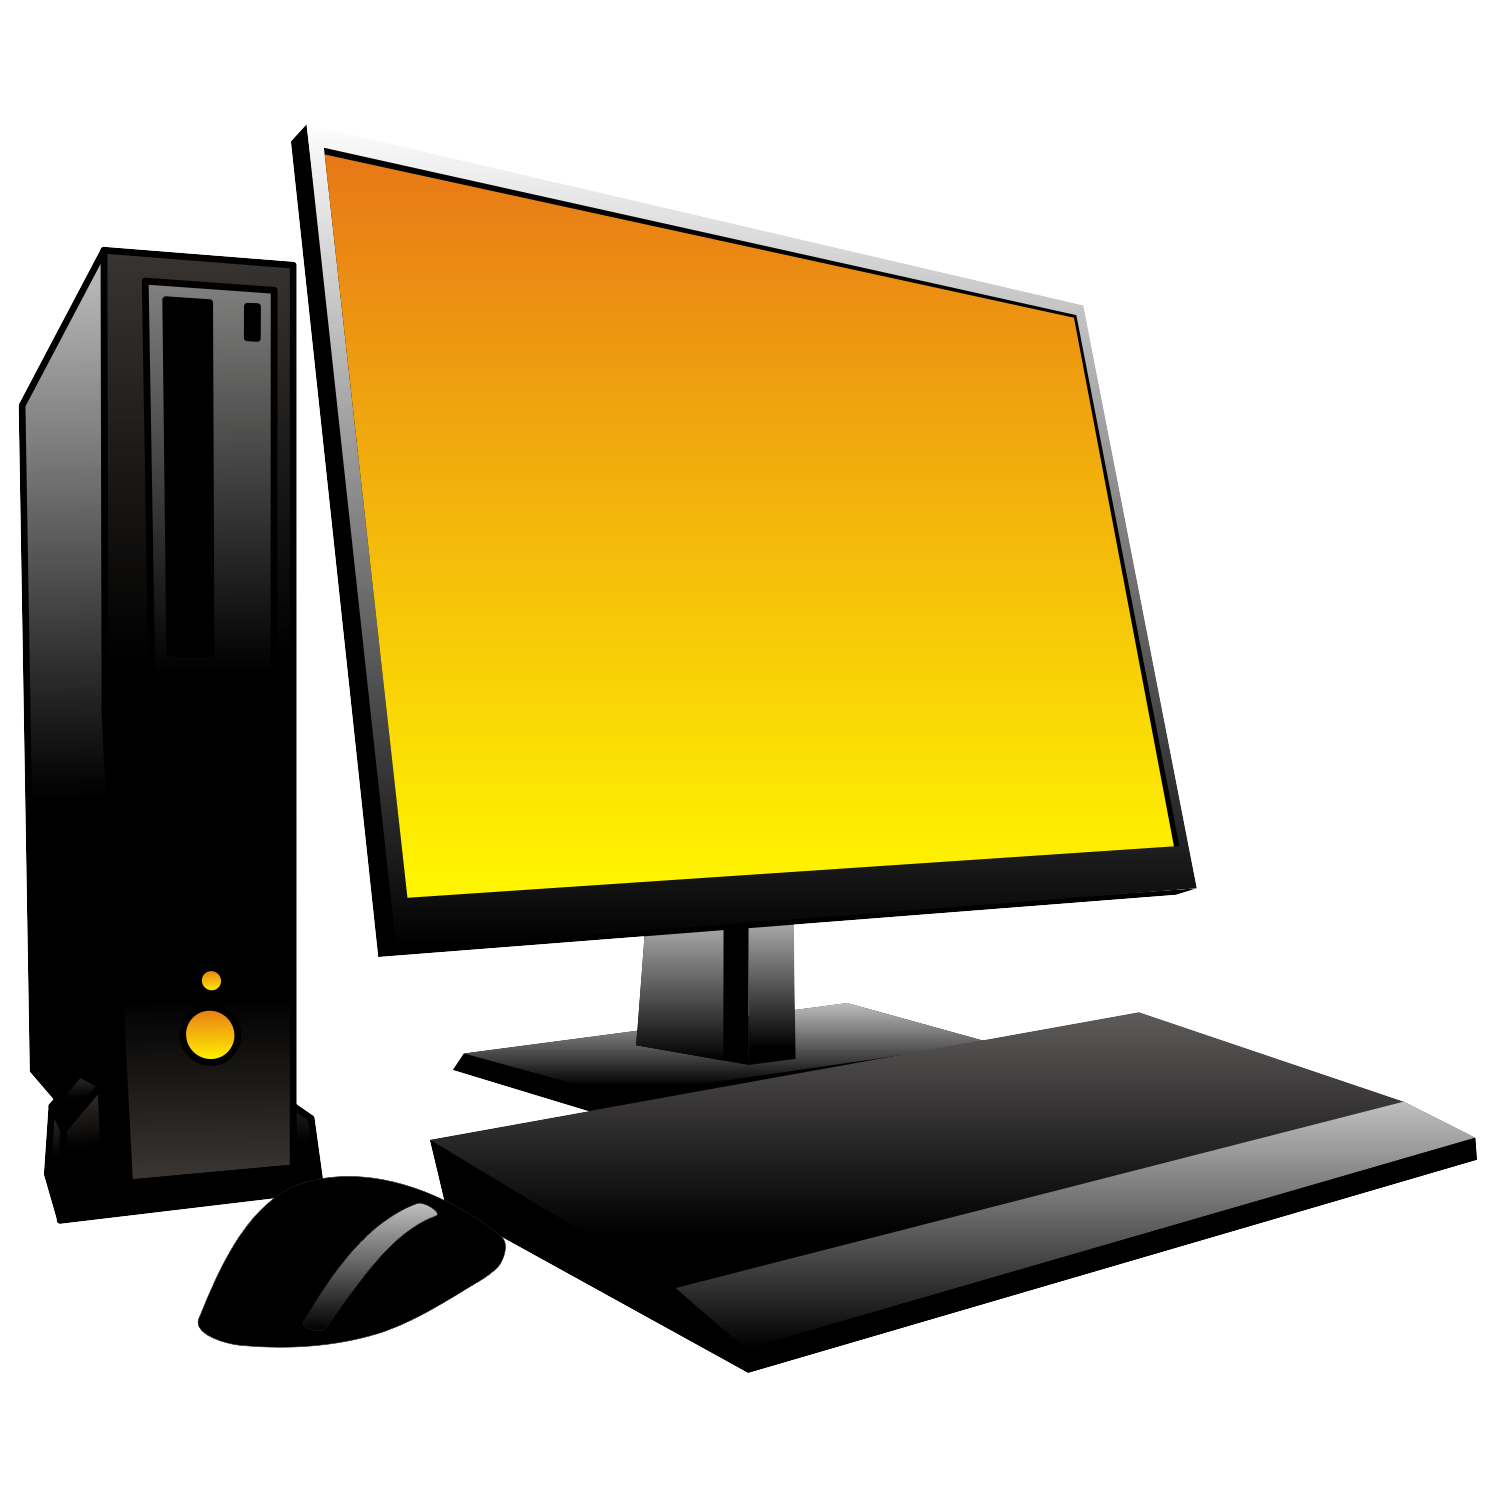 Desktop Computer Free Cliparts That You Can Download To You Computer